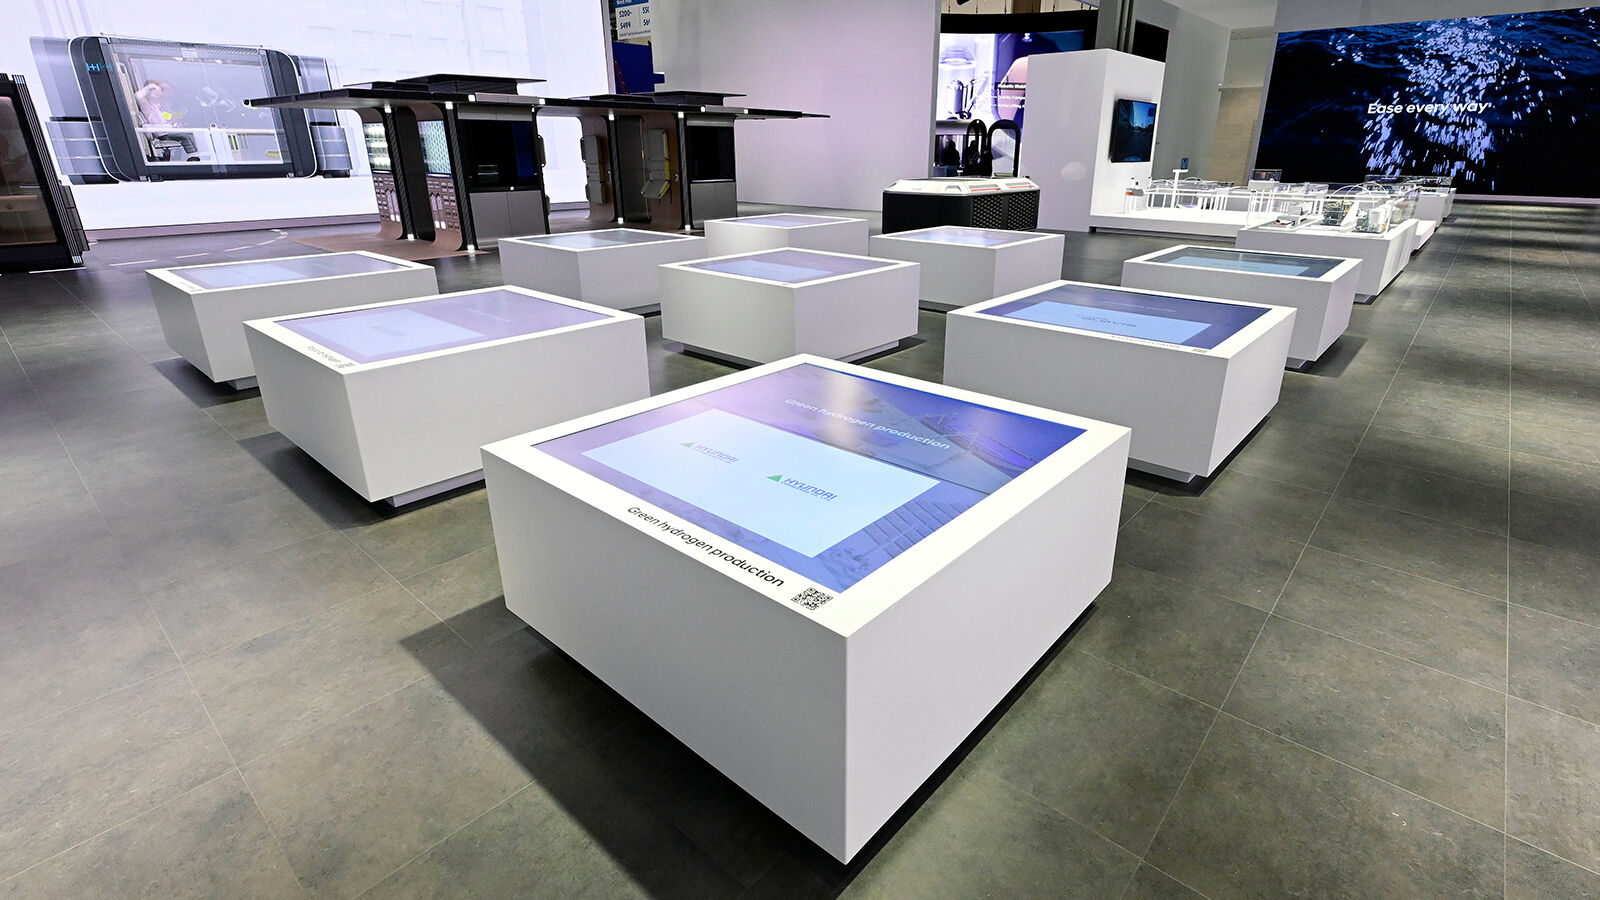 Hyundai Motor is displaying a media table that can examine the technologies that will be applied at each stage of the value chain and showcase the company’s future direction that will speed up the transition to a hydrogen society.